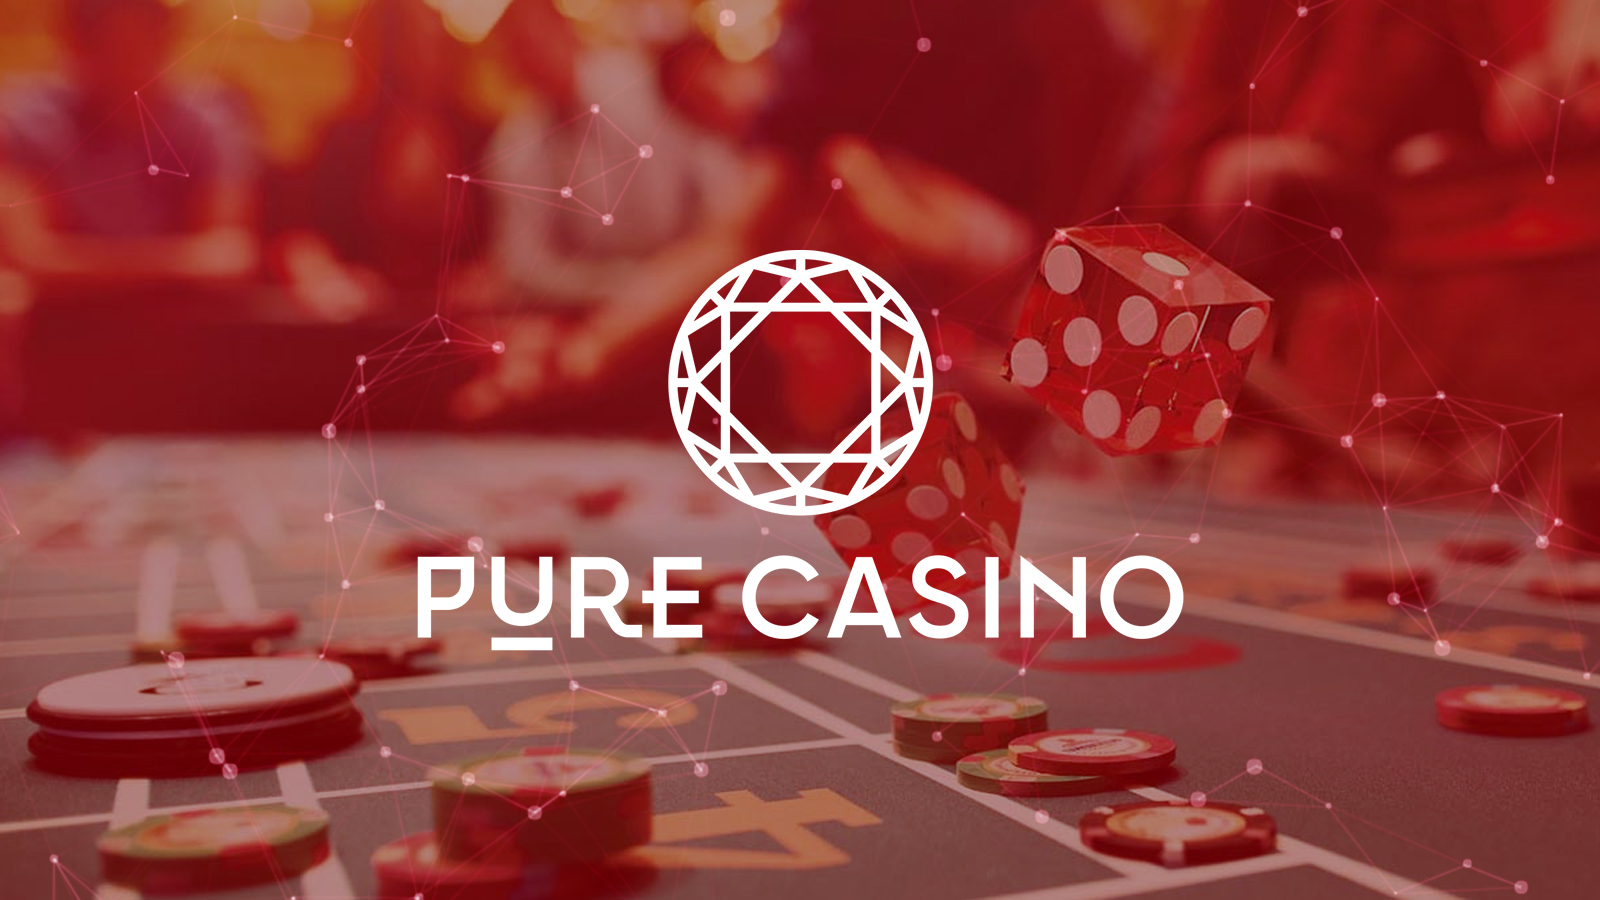 Play poker, roulette, blackjack or baccarat and experience the atmposphere of a real casino at Pure Casino.